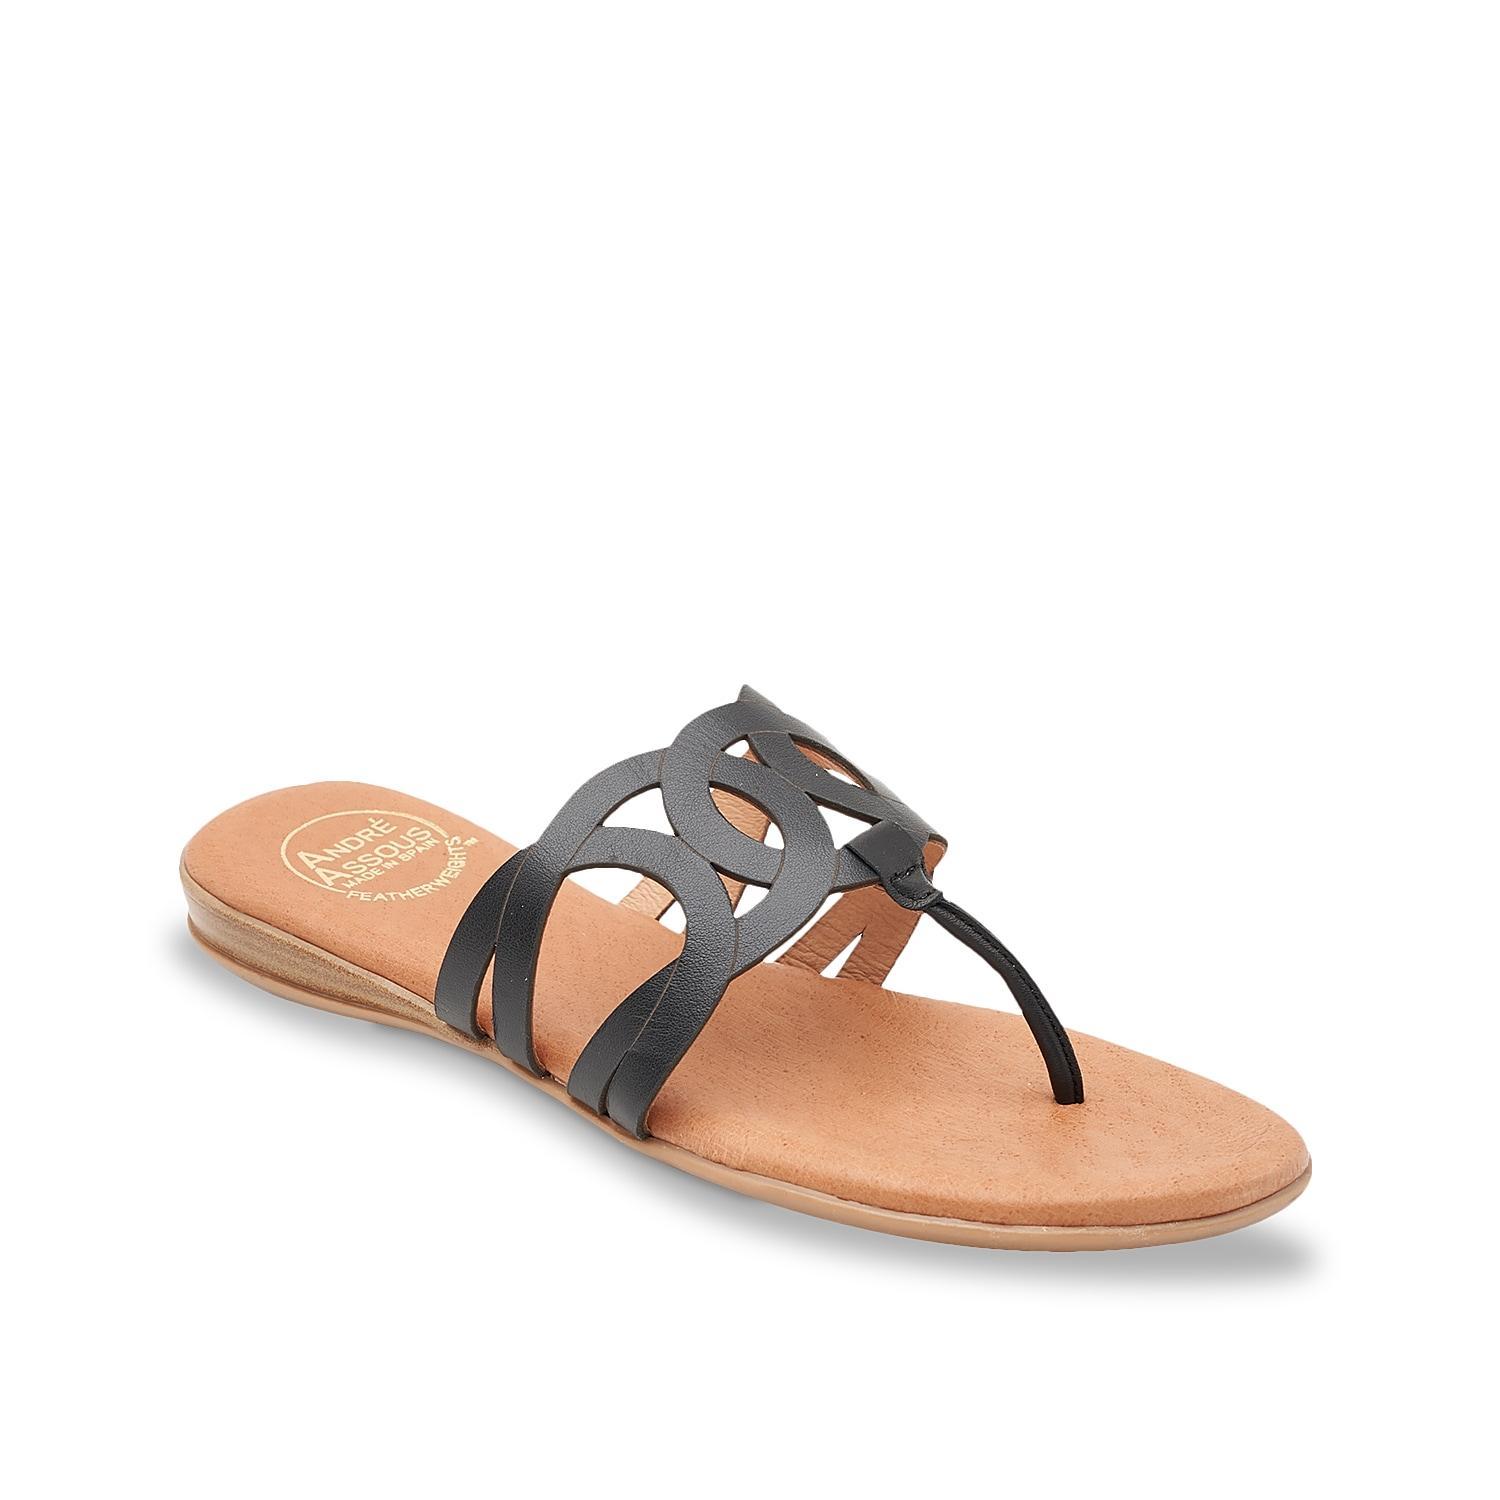 Andr Assous Nature Sandal Product Image